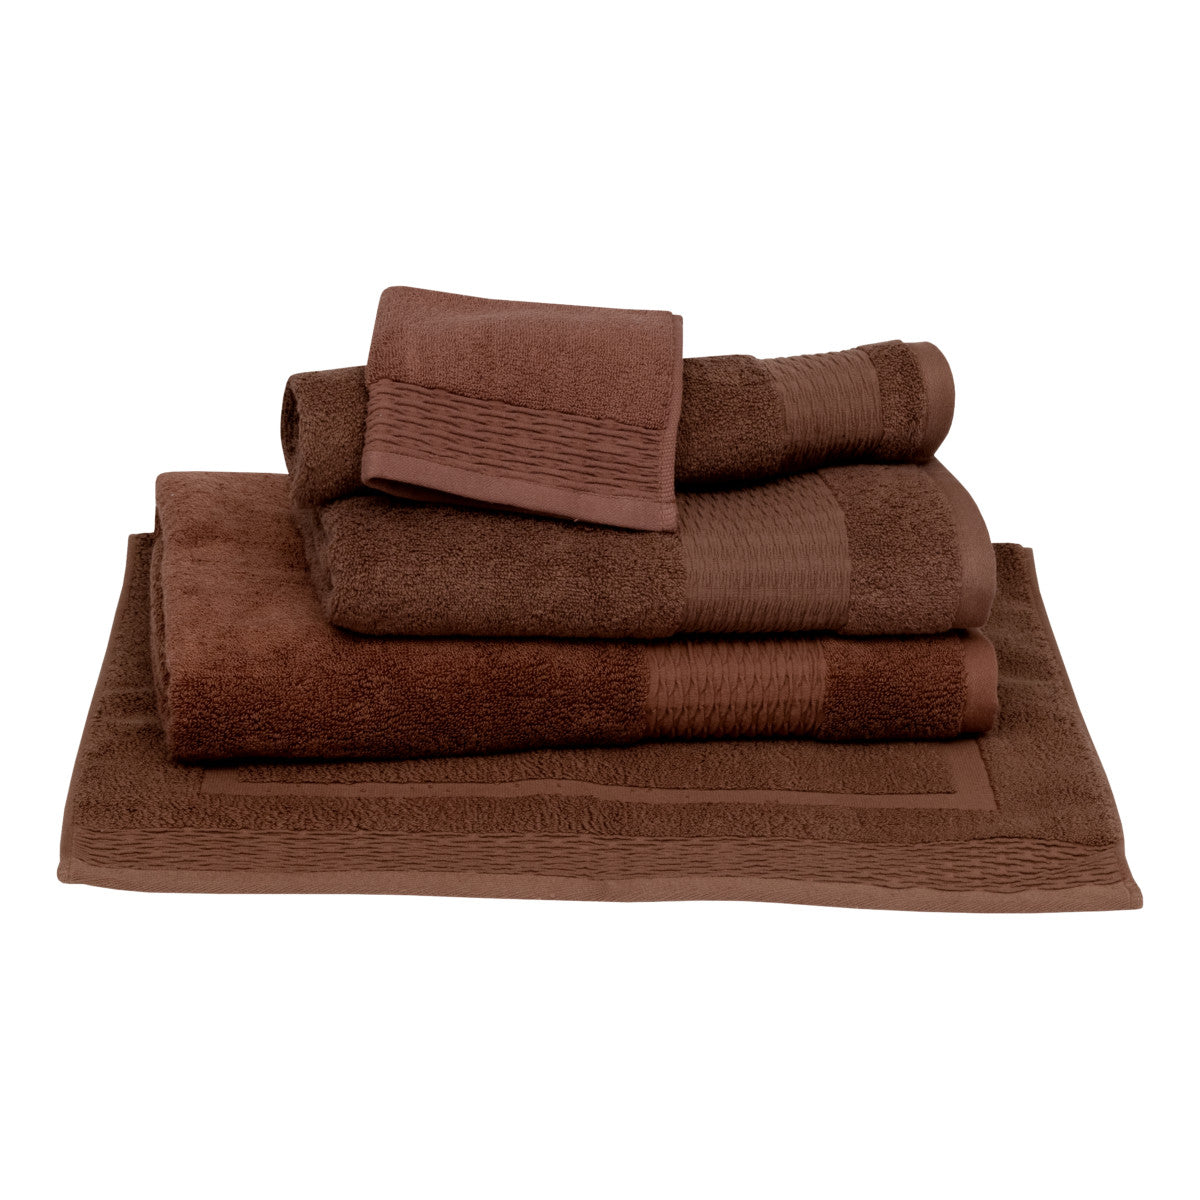 Everyday Living Bath Towel - Light Brown, 1 ct - Dillons Food Stores